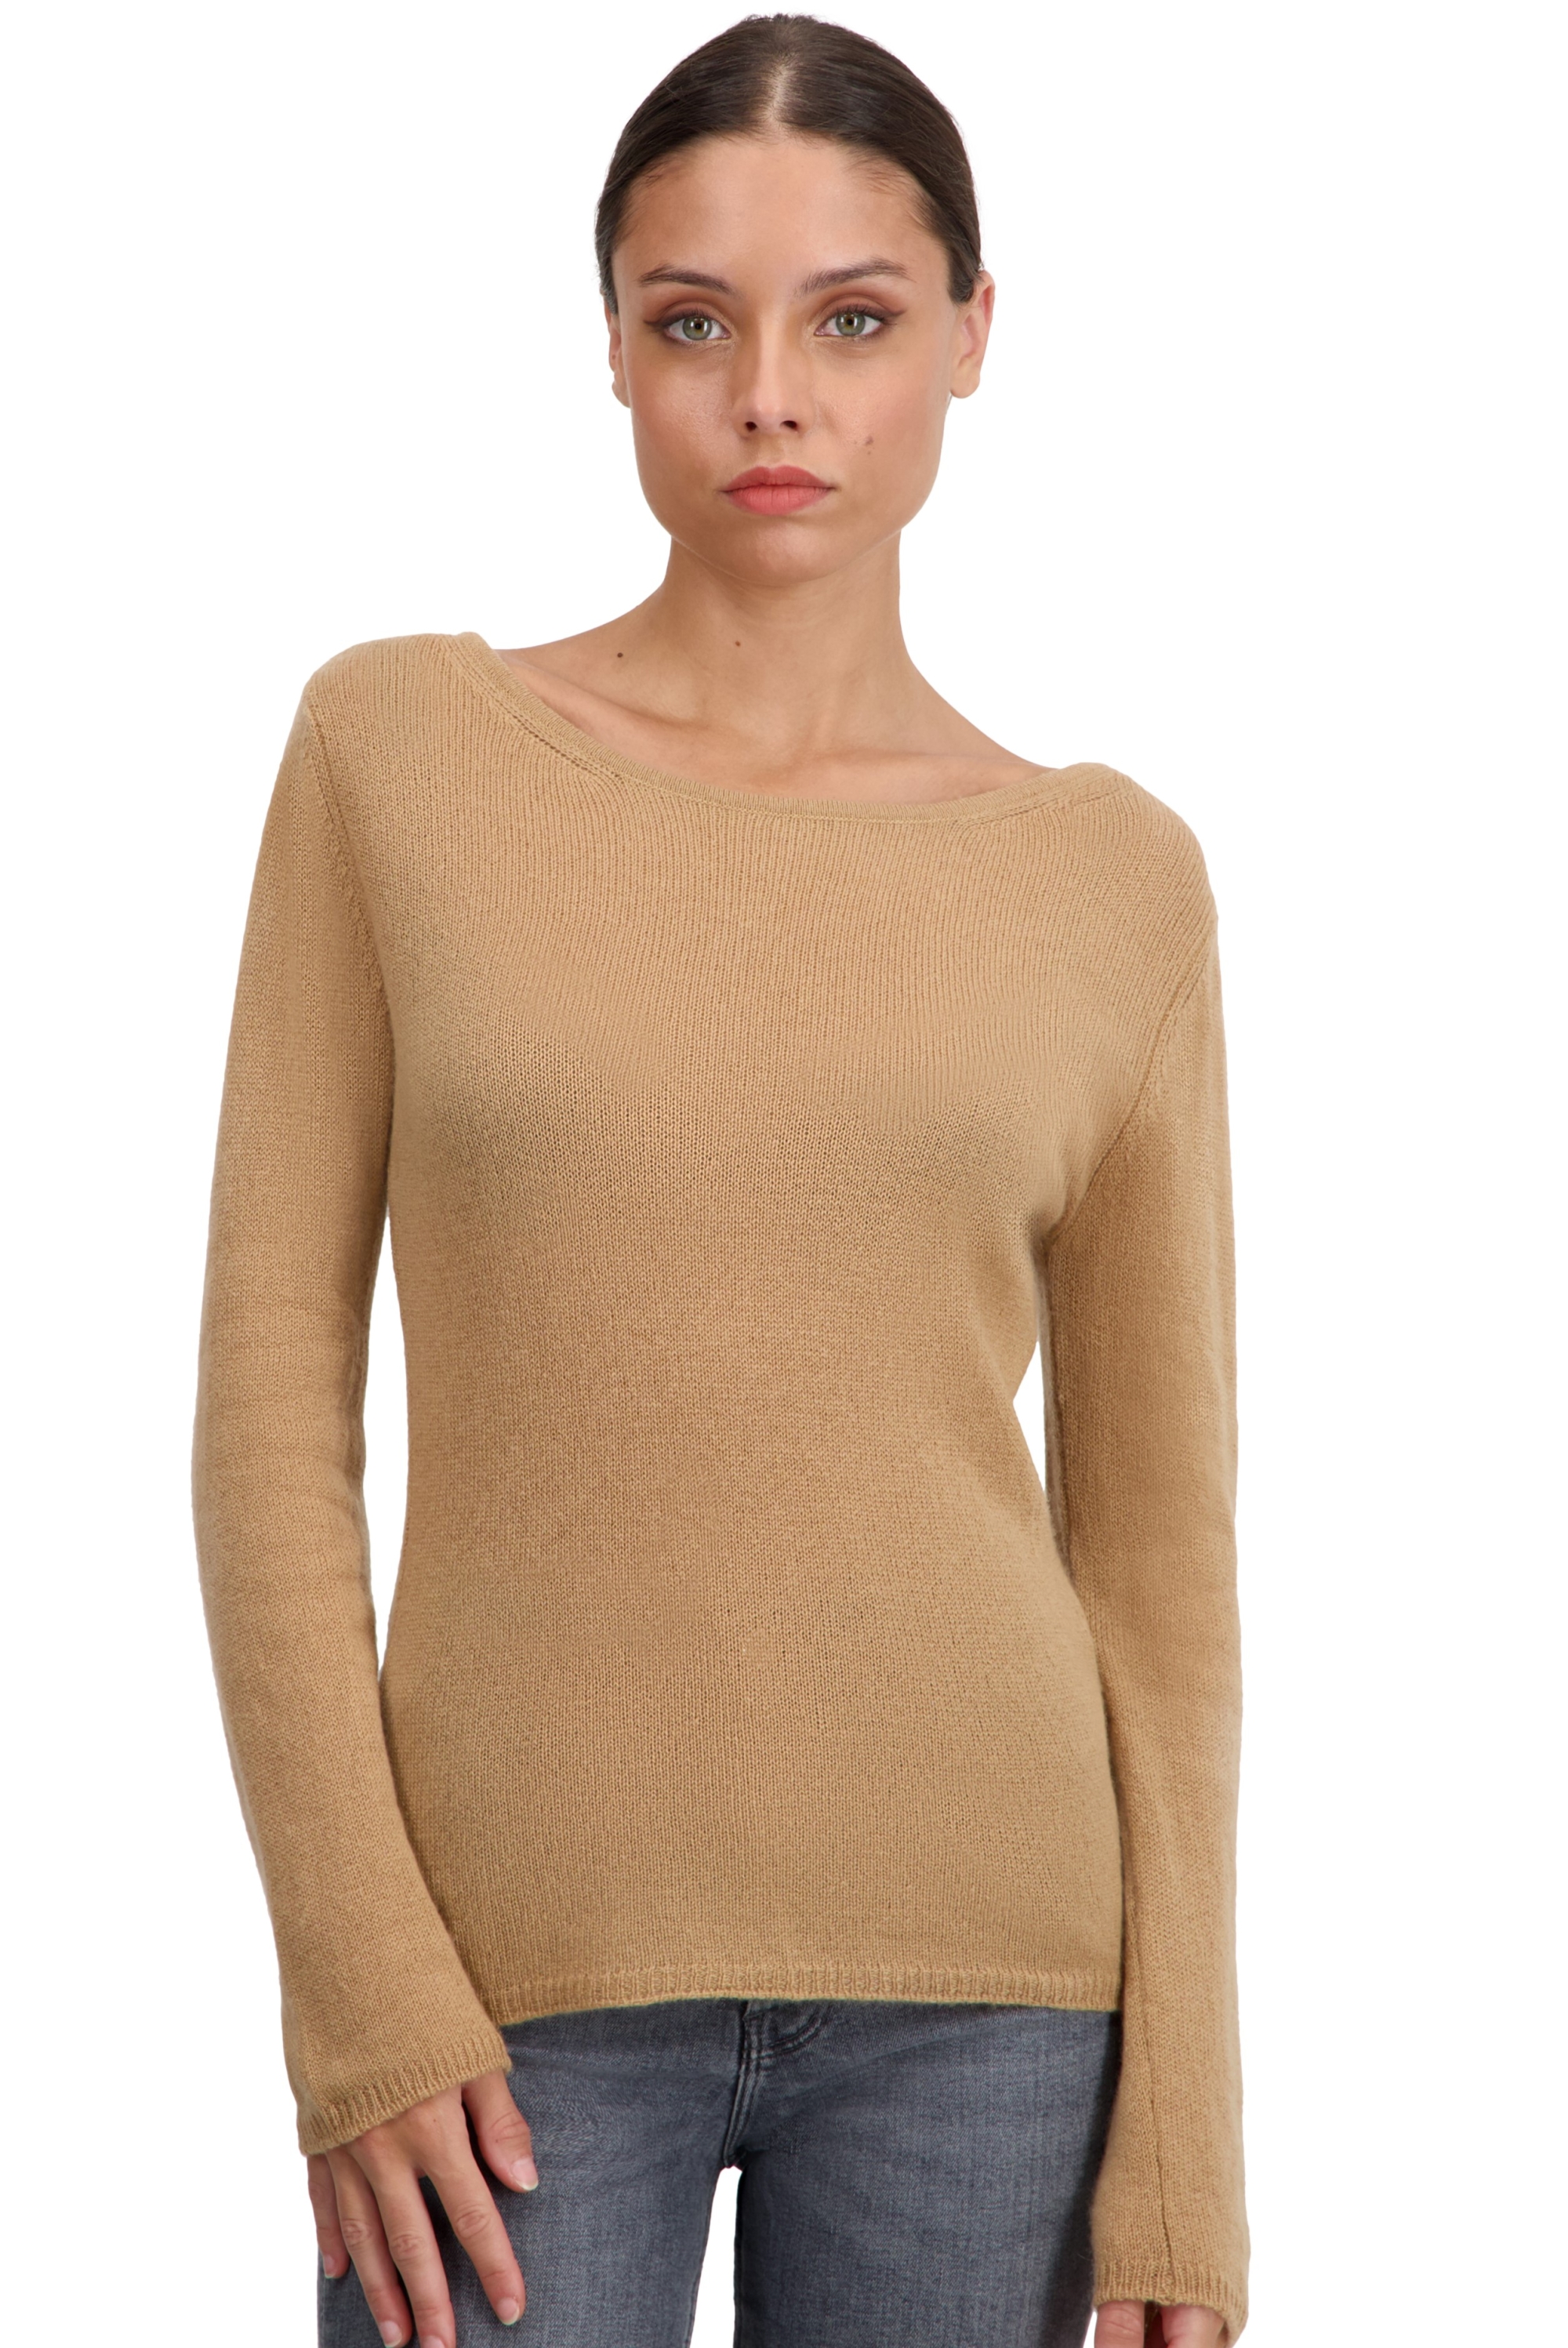 Cashmere ladies basic sweaters at low prices caleen camel 4xl